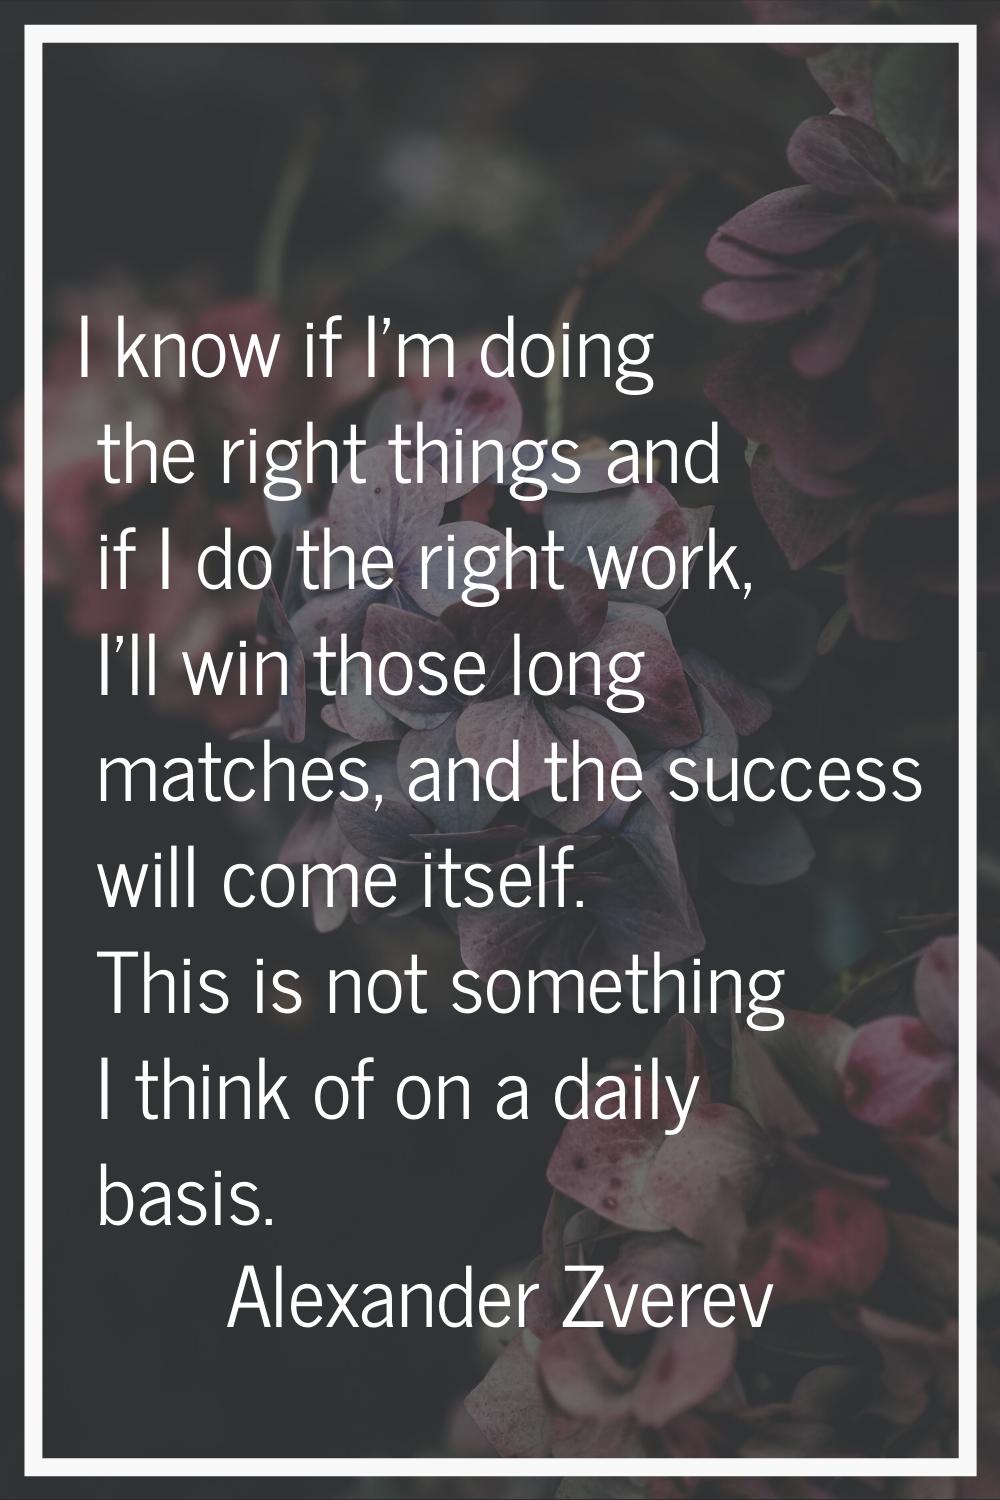 I know if I'm doing the right things and if I do the right work, I'll win those long matches, and t